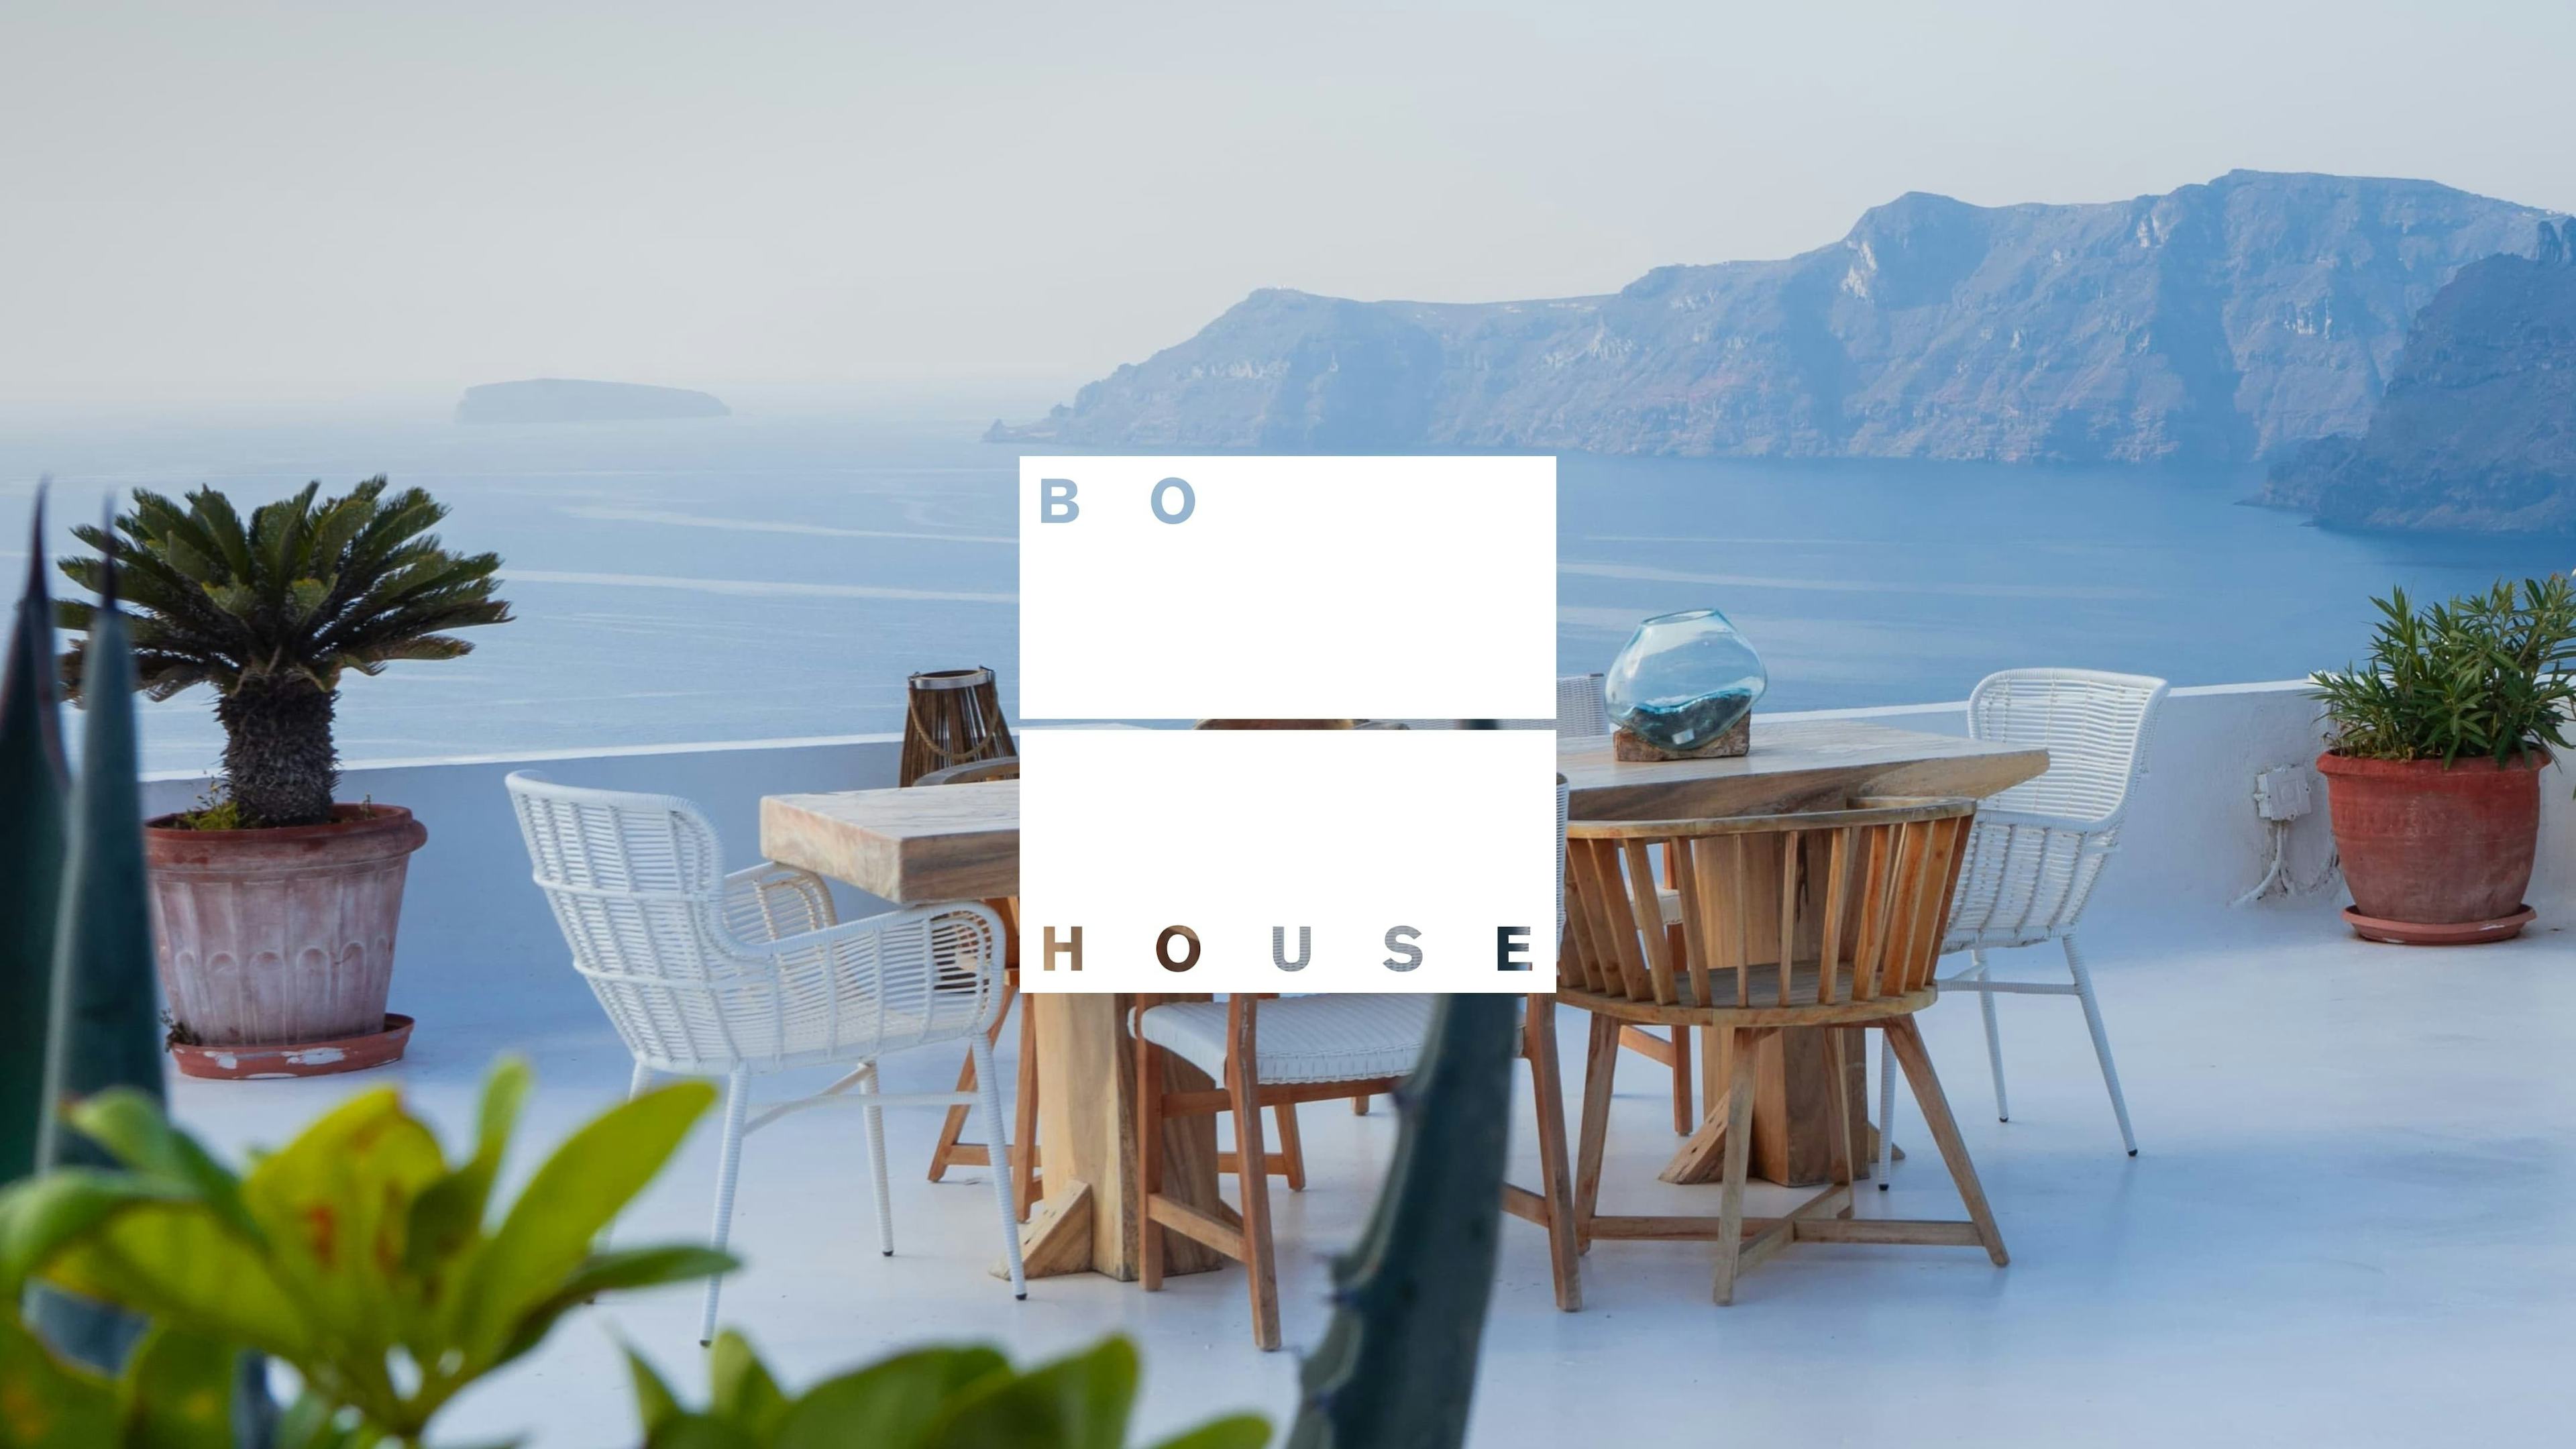 Responsive design, iconography and development for Bo-House. Bo-House is a collection of unforgettable houses in Saint-Tropez, the French Alps and Saint Barthélemy.